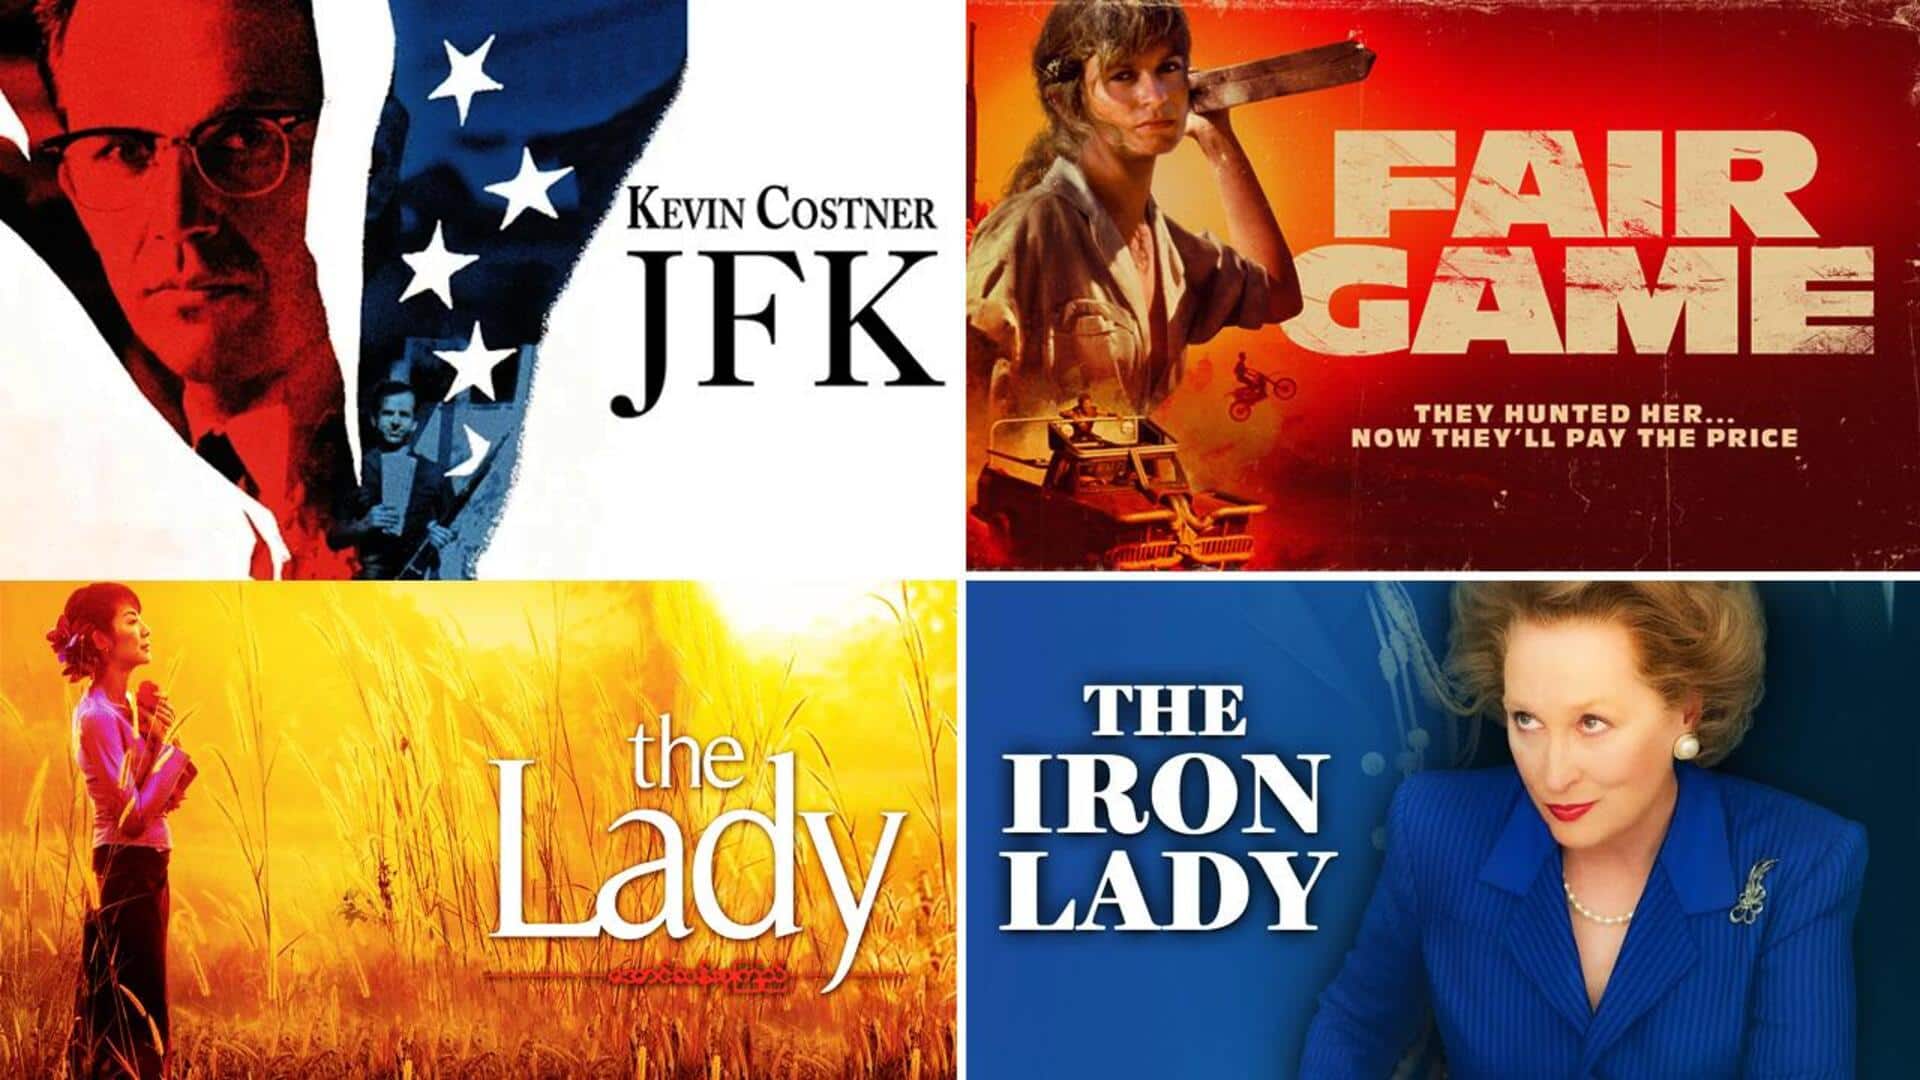 'JFK' to 'The Lady': Best Hollywood movies on political leaders